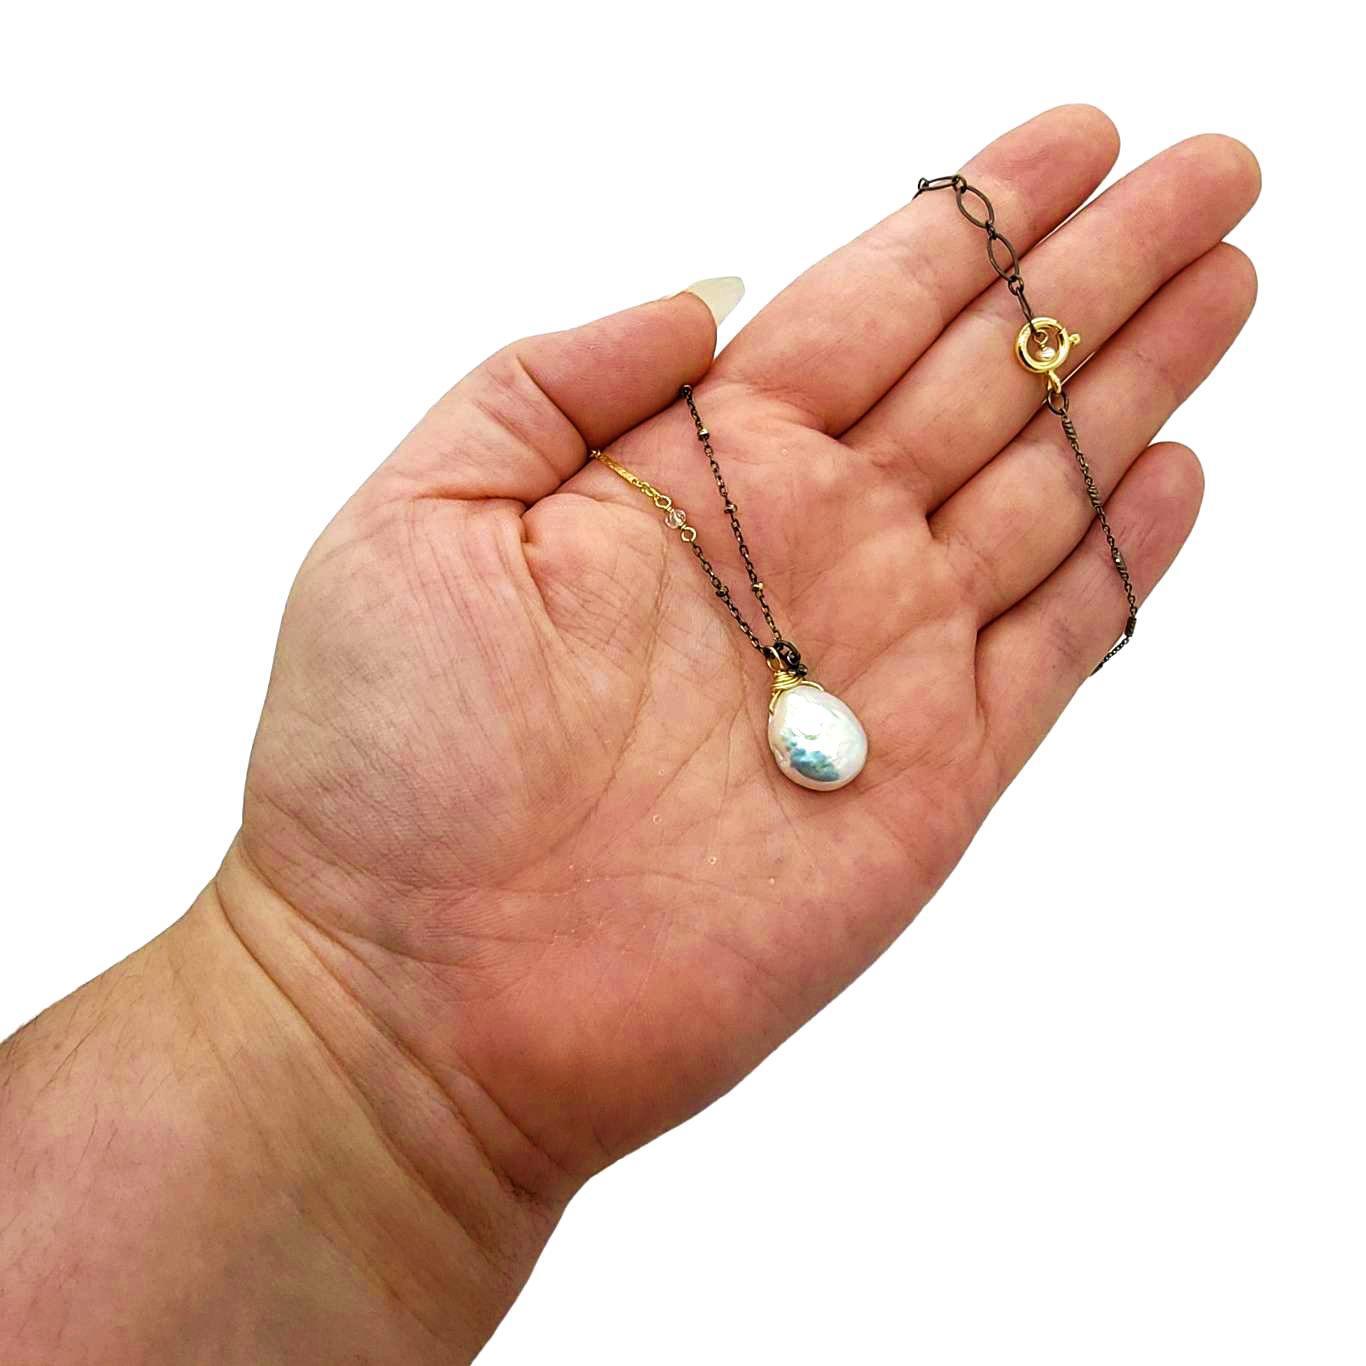 Necklace - Large Pearl Pendant by Calliope Jewelry